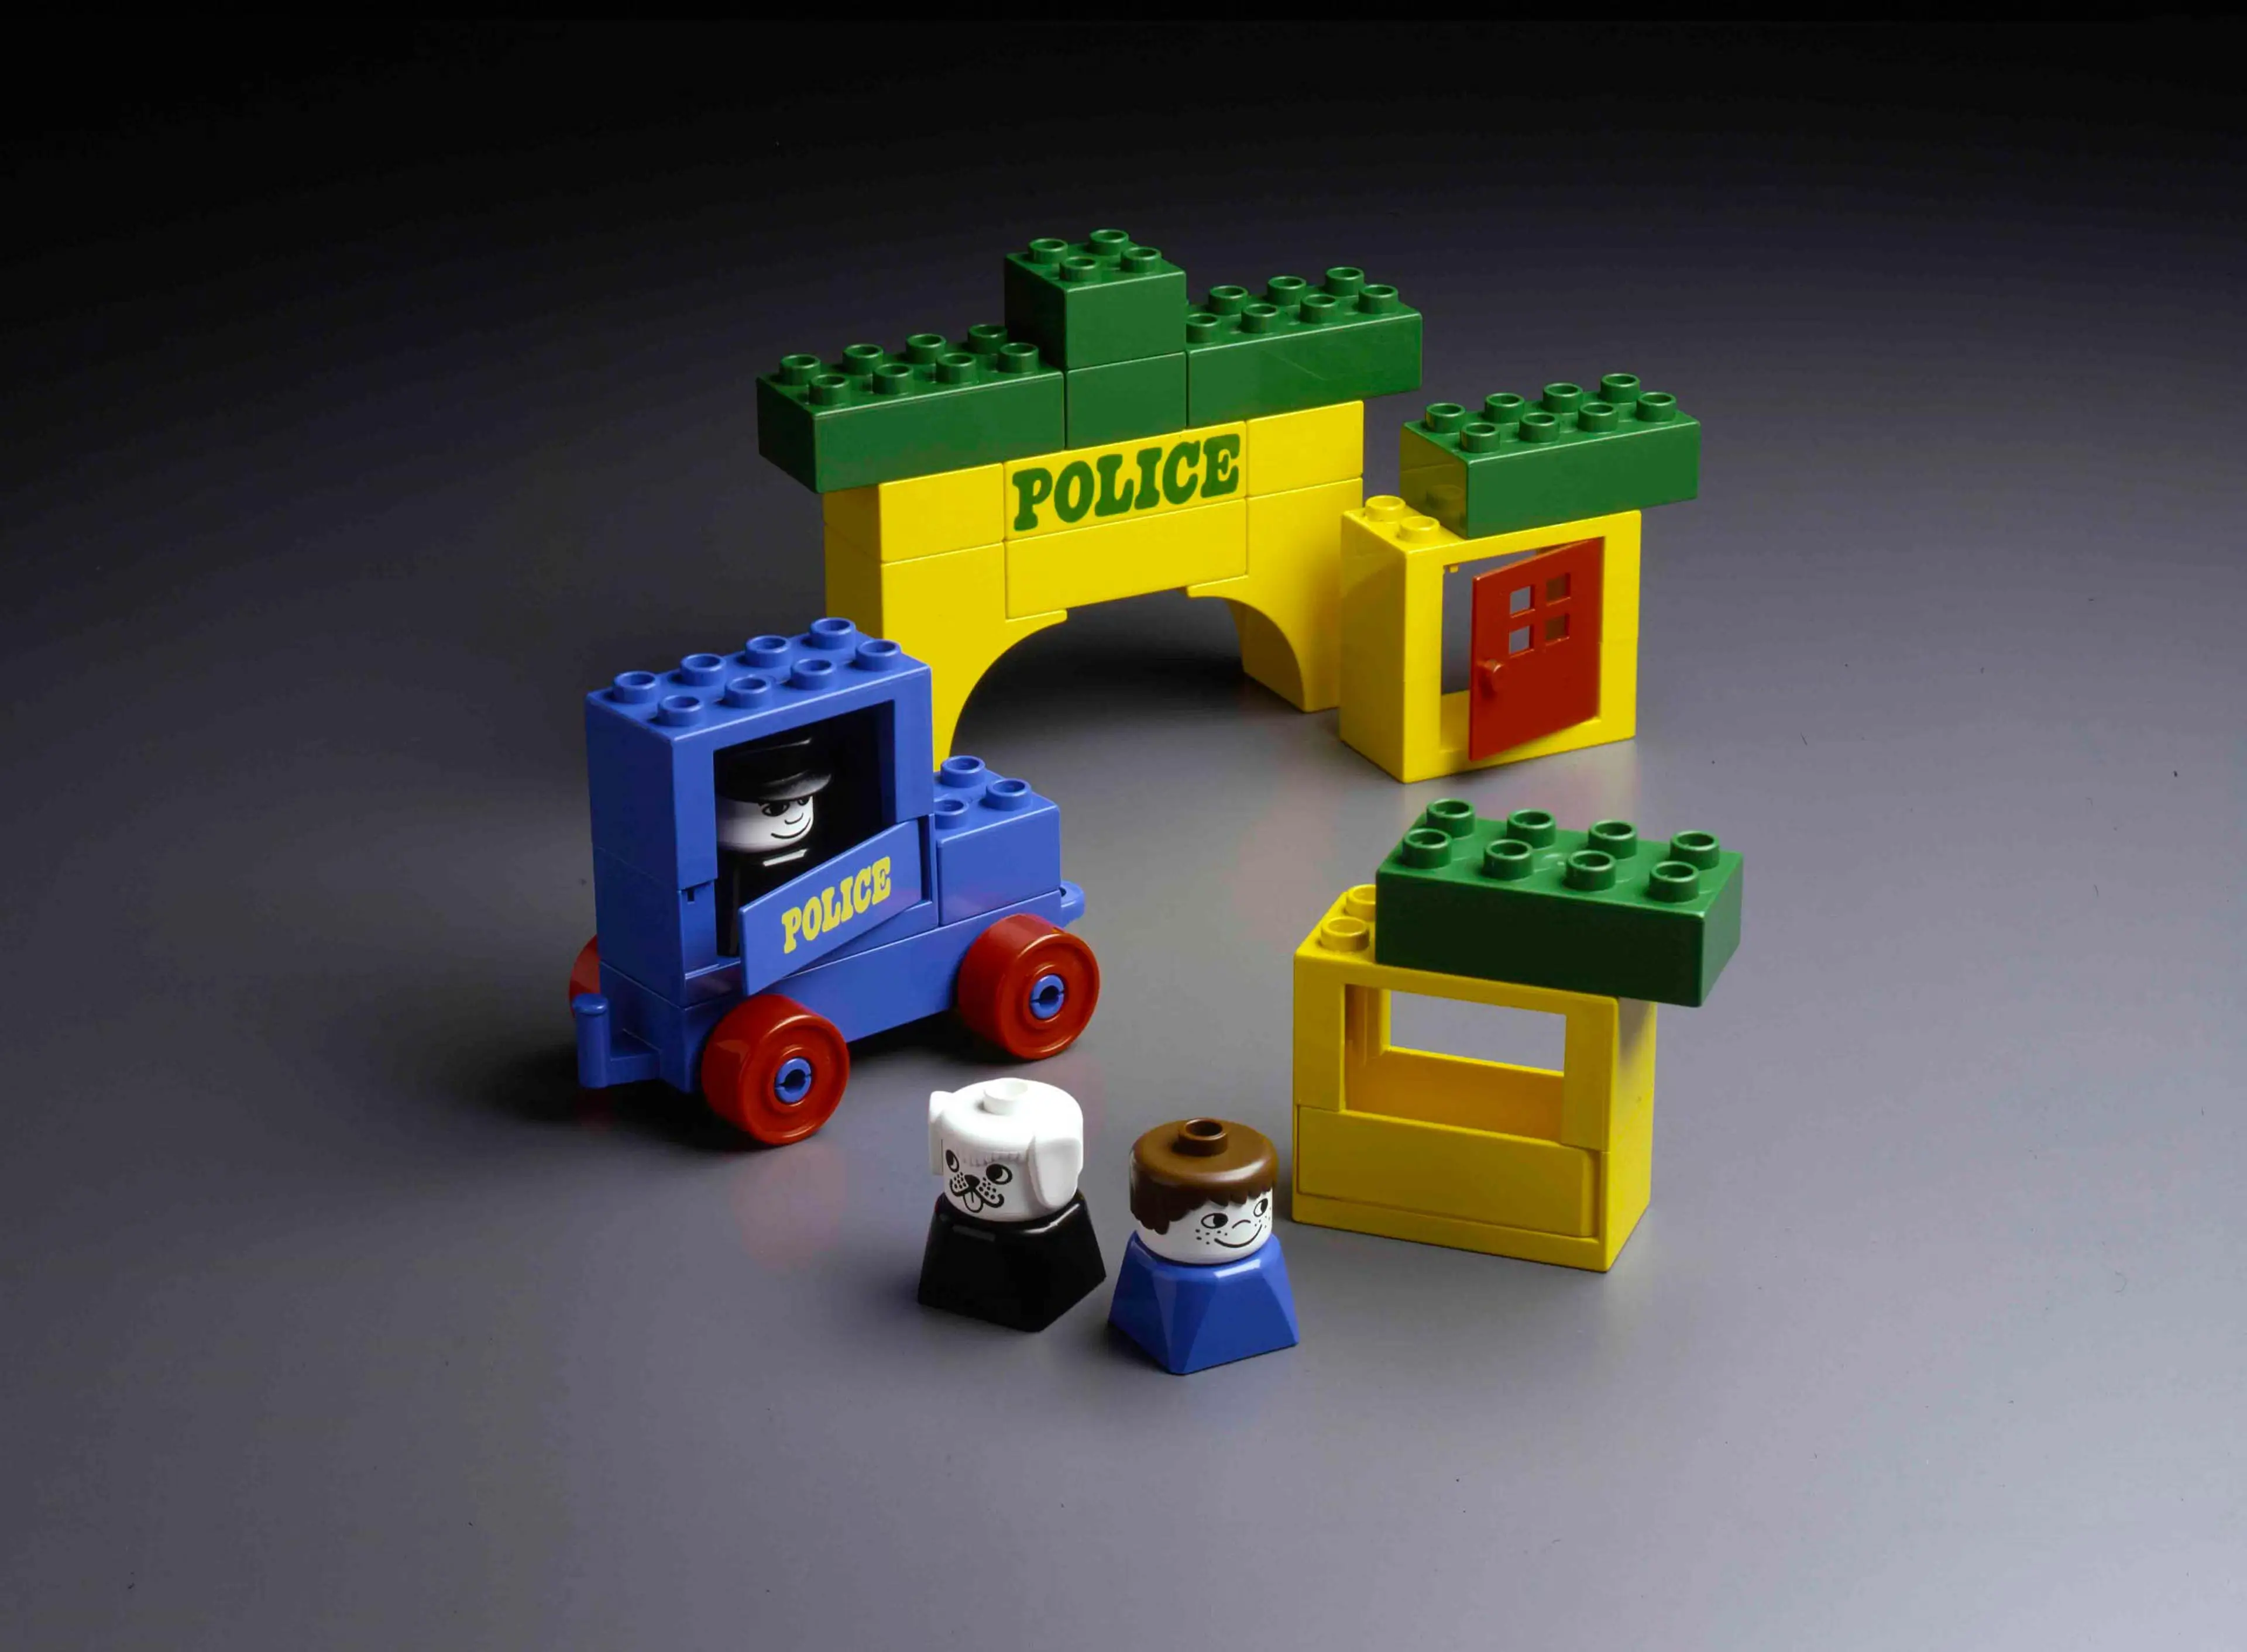 DUPLO set from 1977 containing DUPLO figures, a blue car and a yellow house